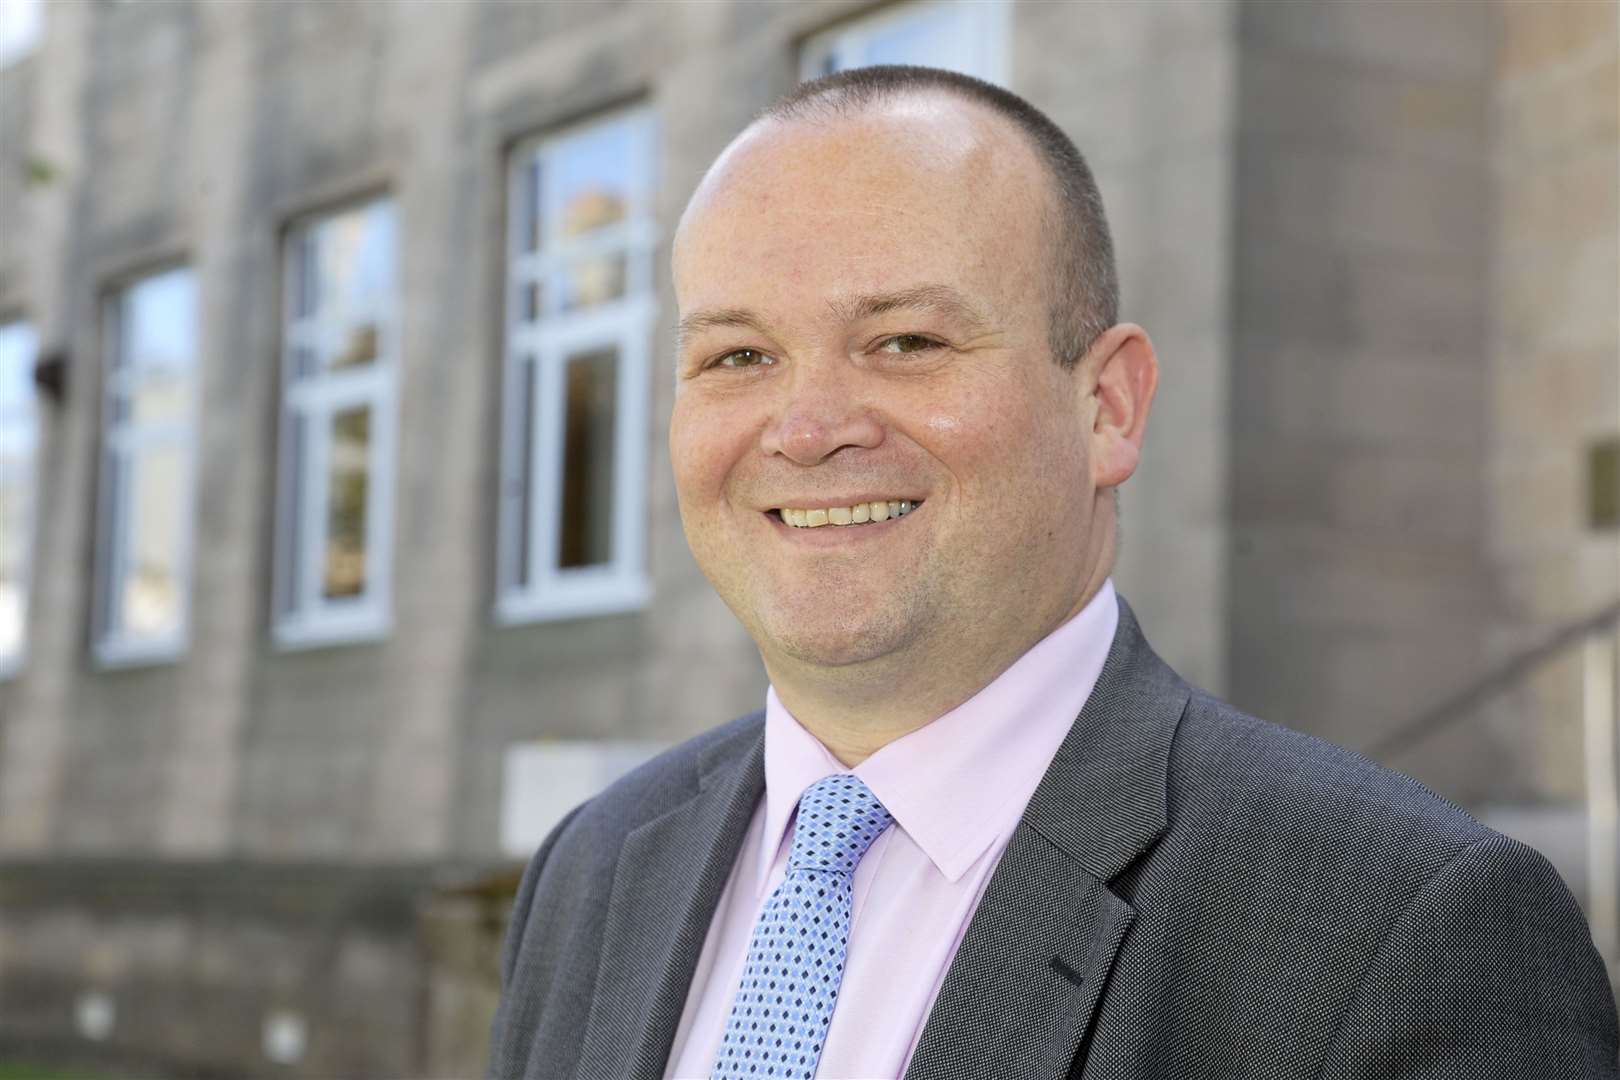 The director of Education and Children’s Services, Laurence Findlay, told ESC members that the campus project was a “once in a generation opportunity” for Peterhead.